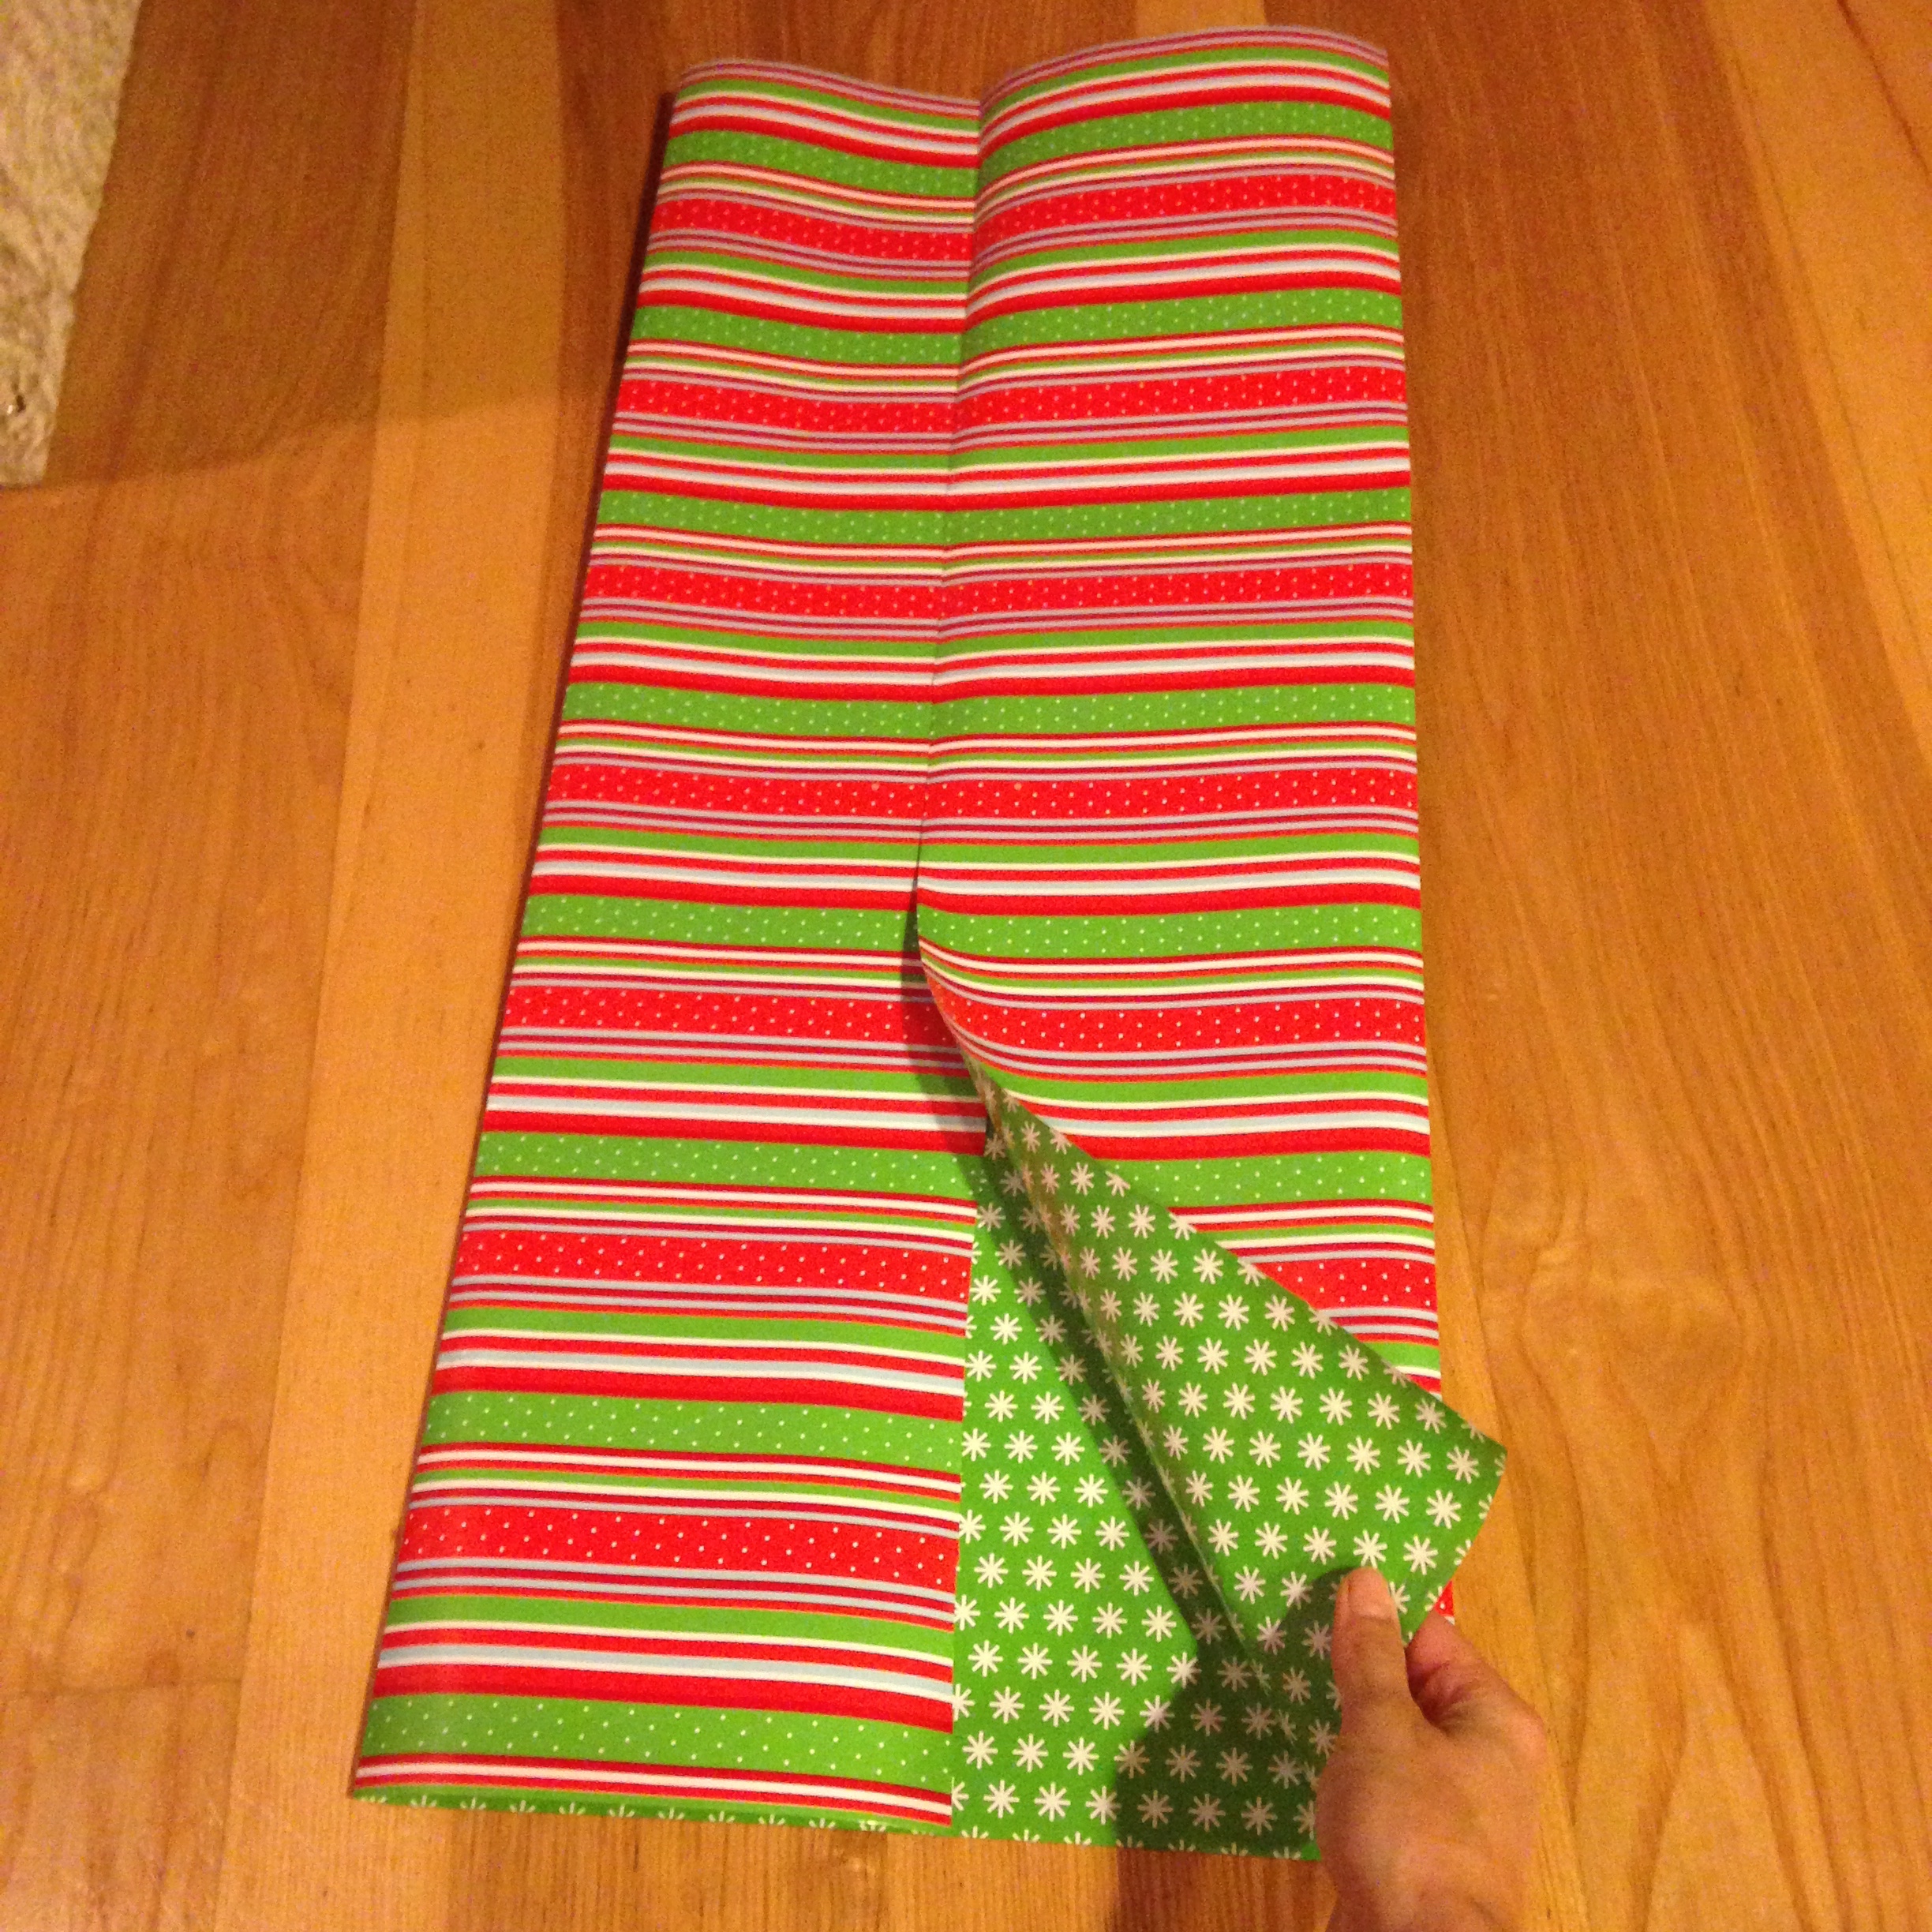 How to Make a Gift Bag Out of Wrapping Paper